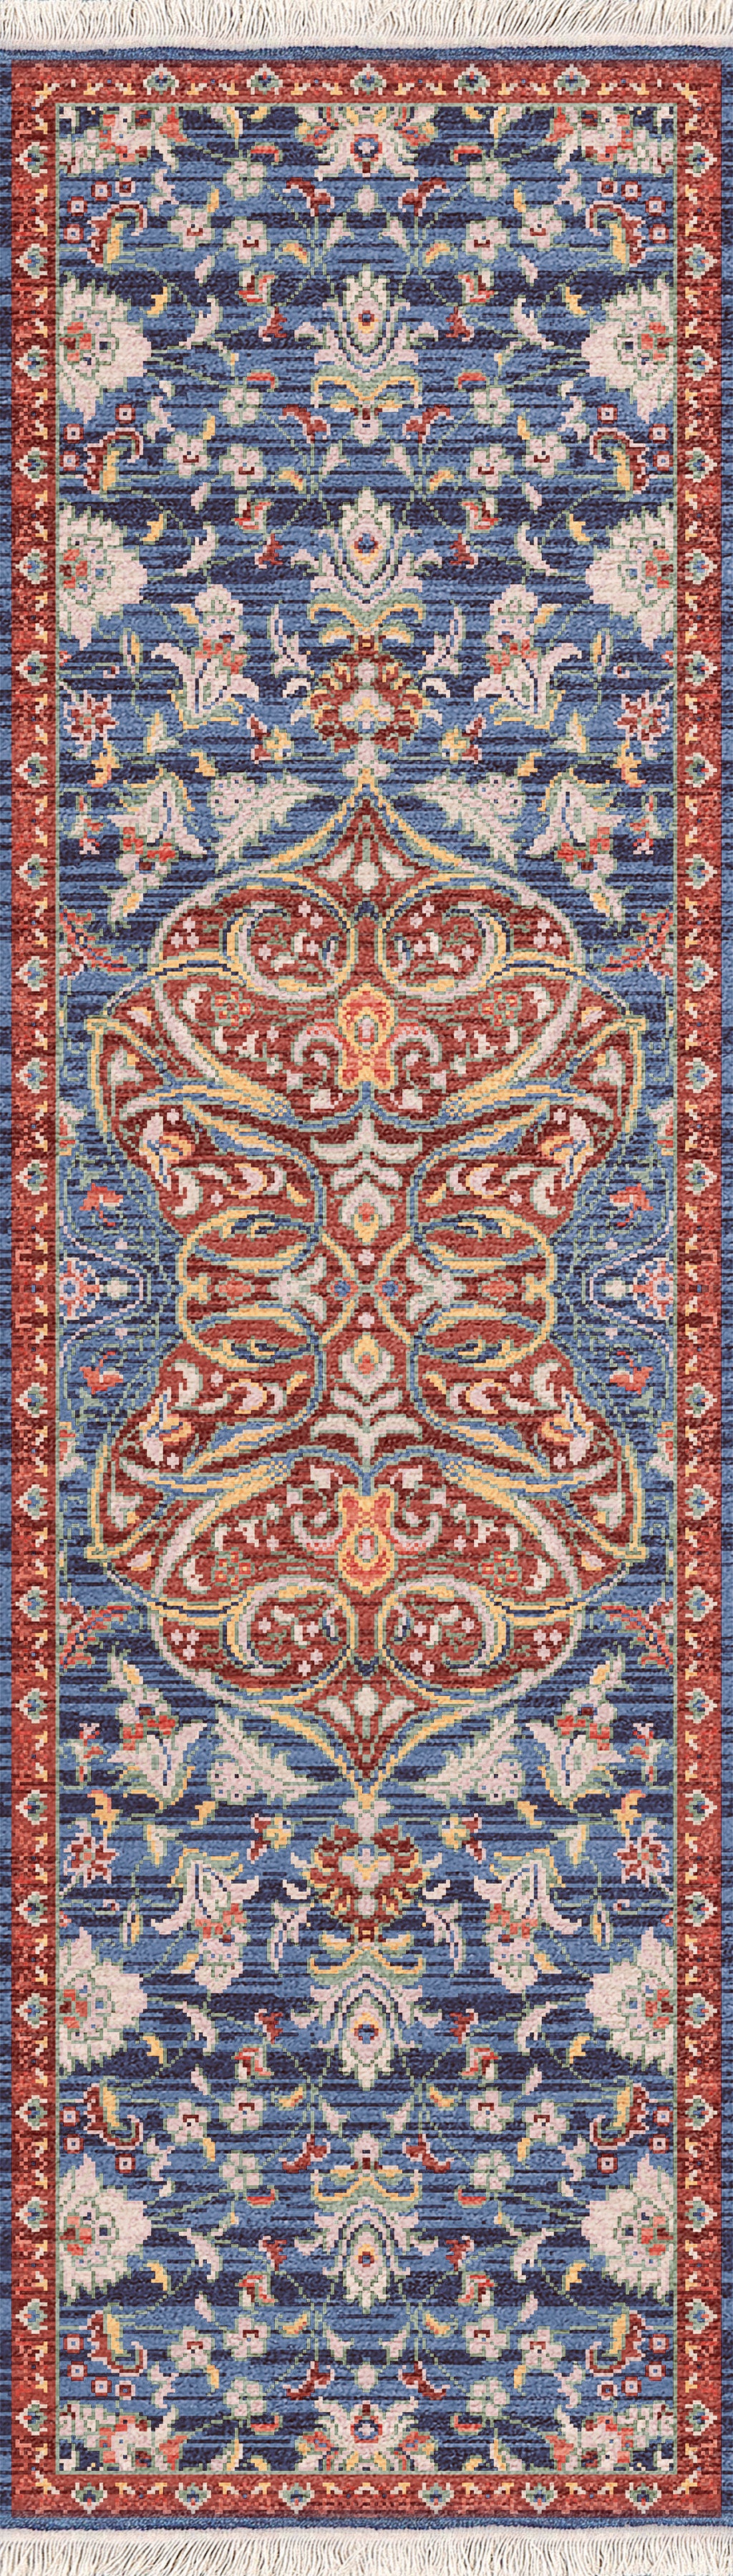 Wade 18607-539 Navy/Red/Multi Area Rug